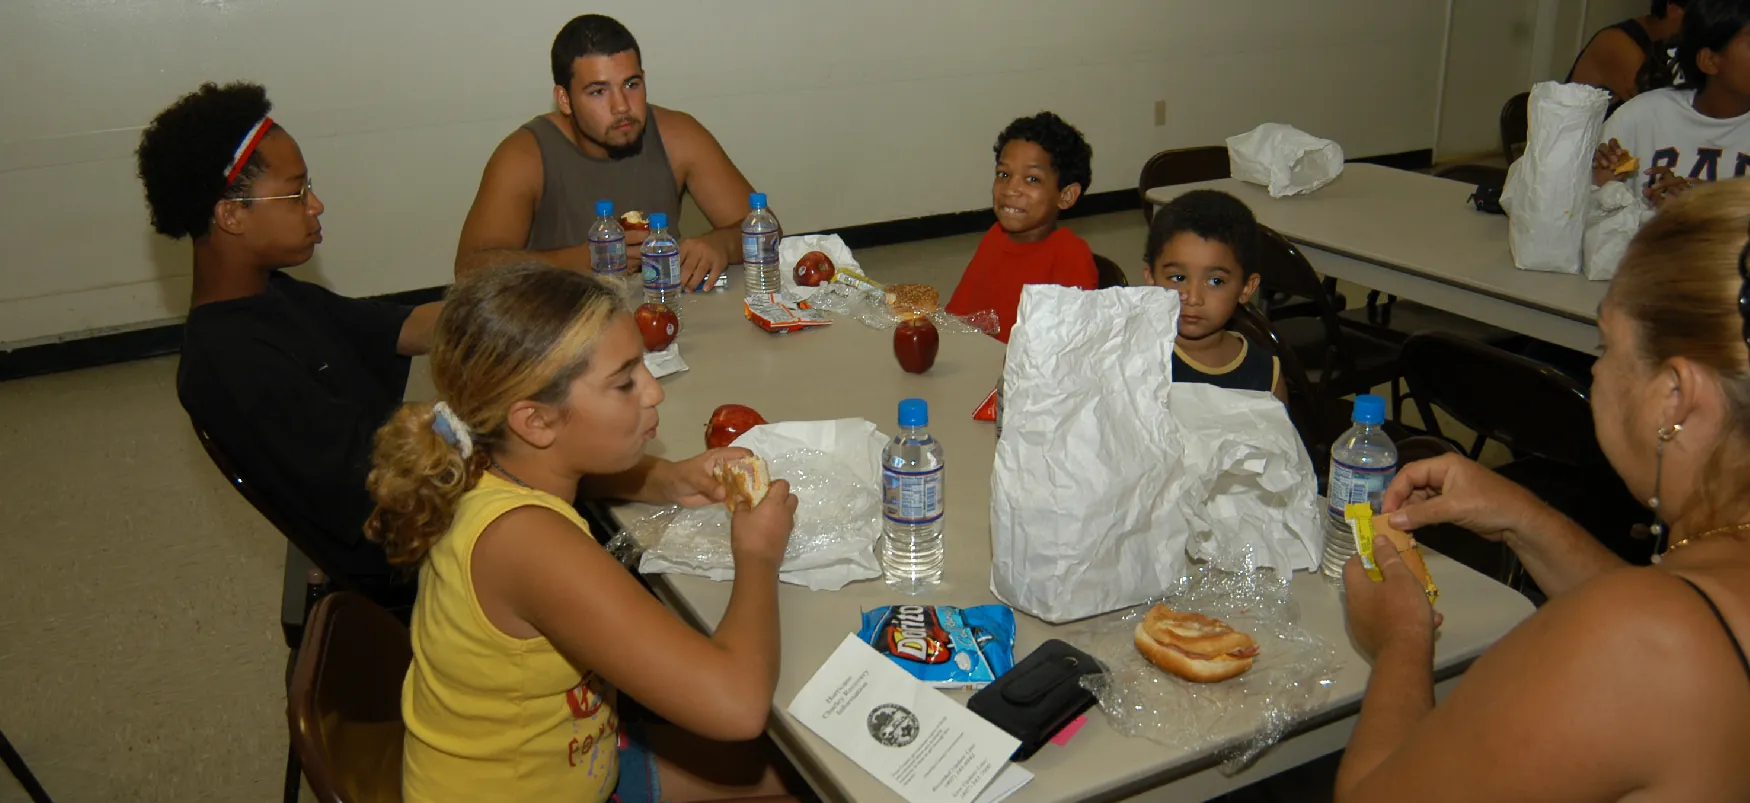 An evacuated Floridian family eats a makeshift meal at a shelter set up during Hurricane Charley in 2004.